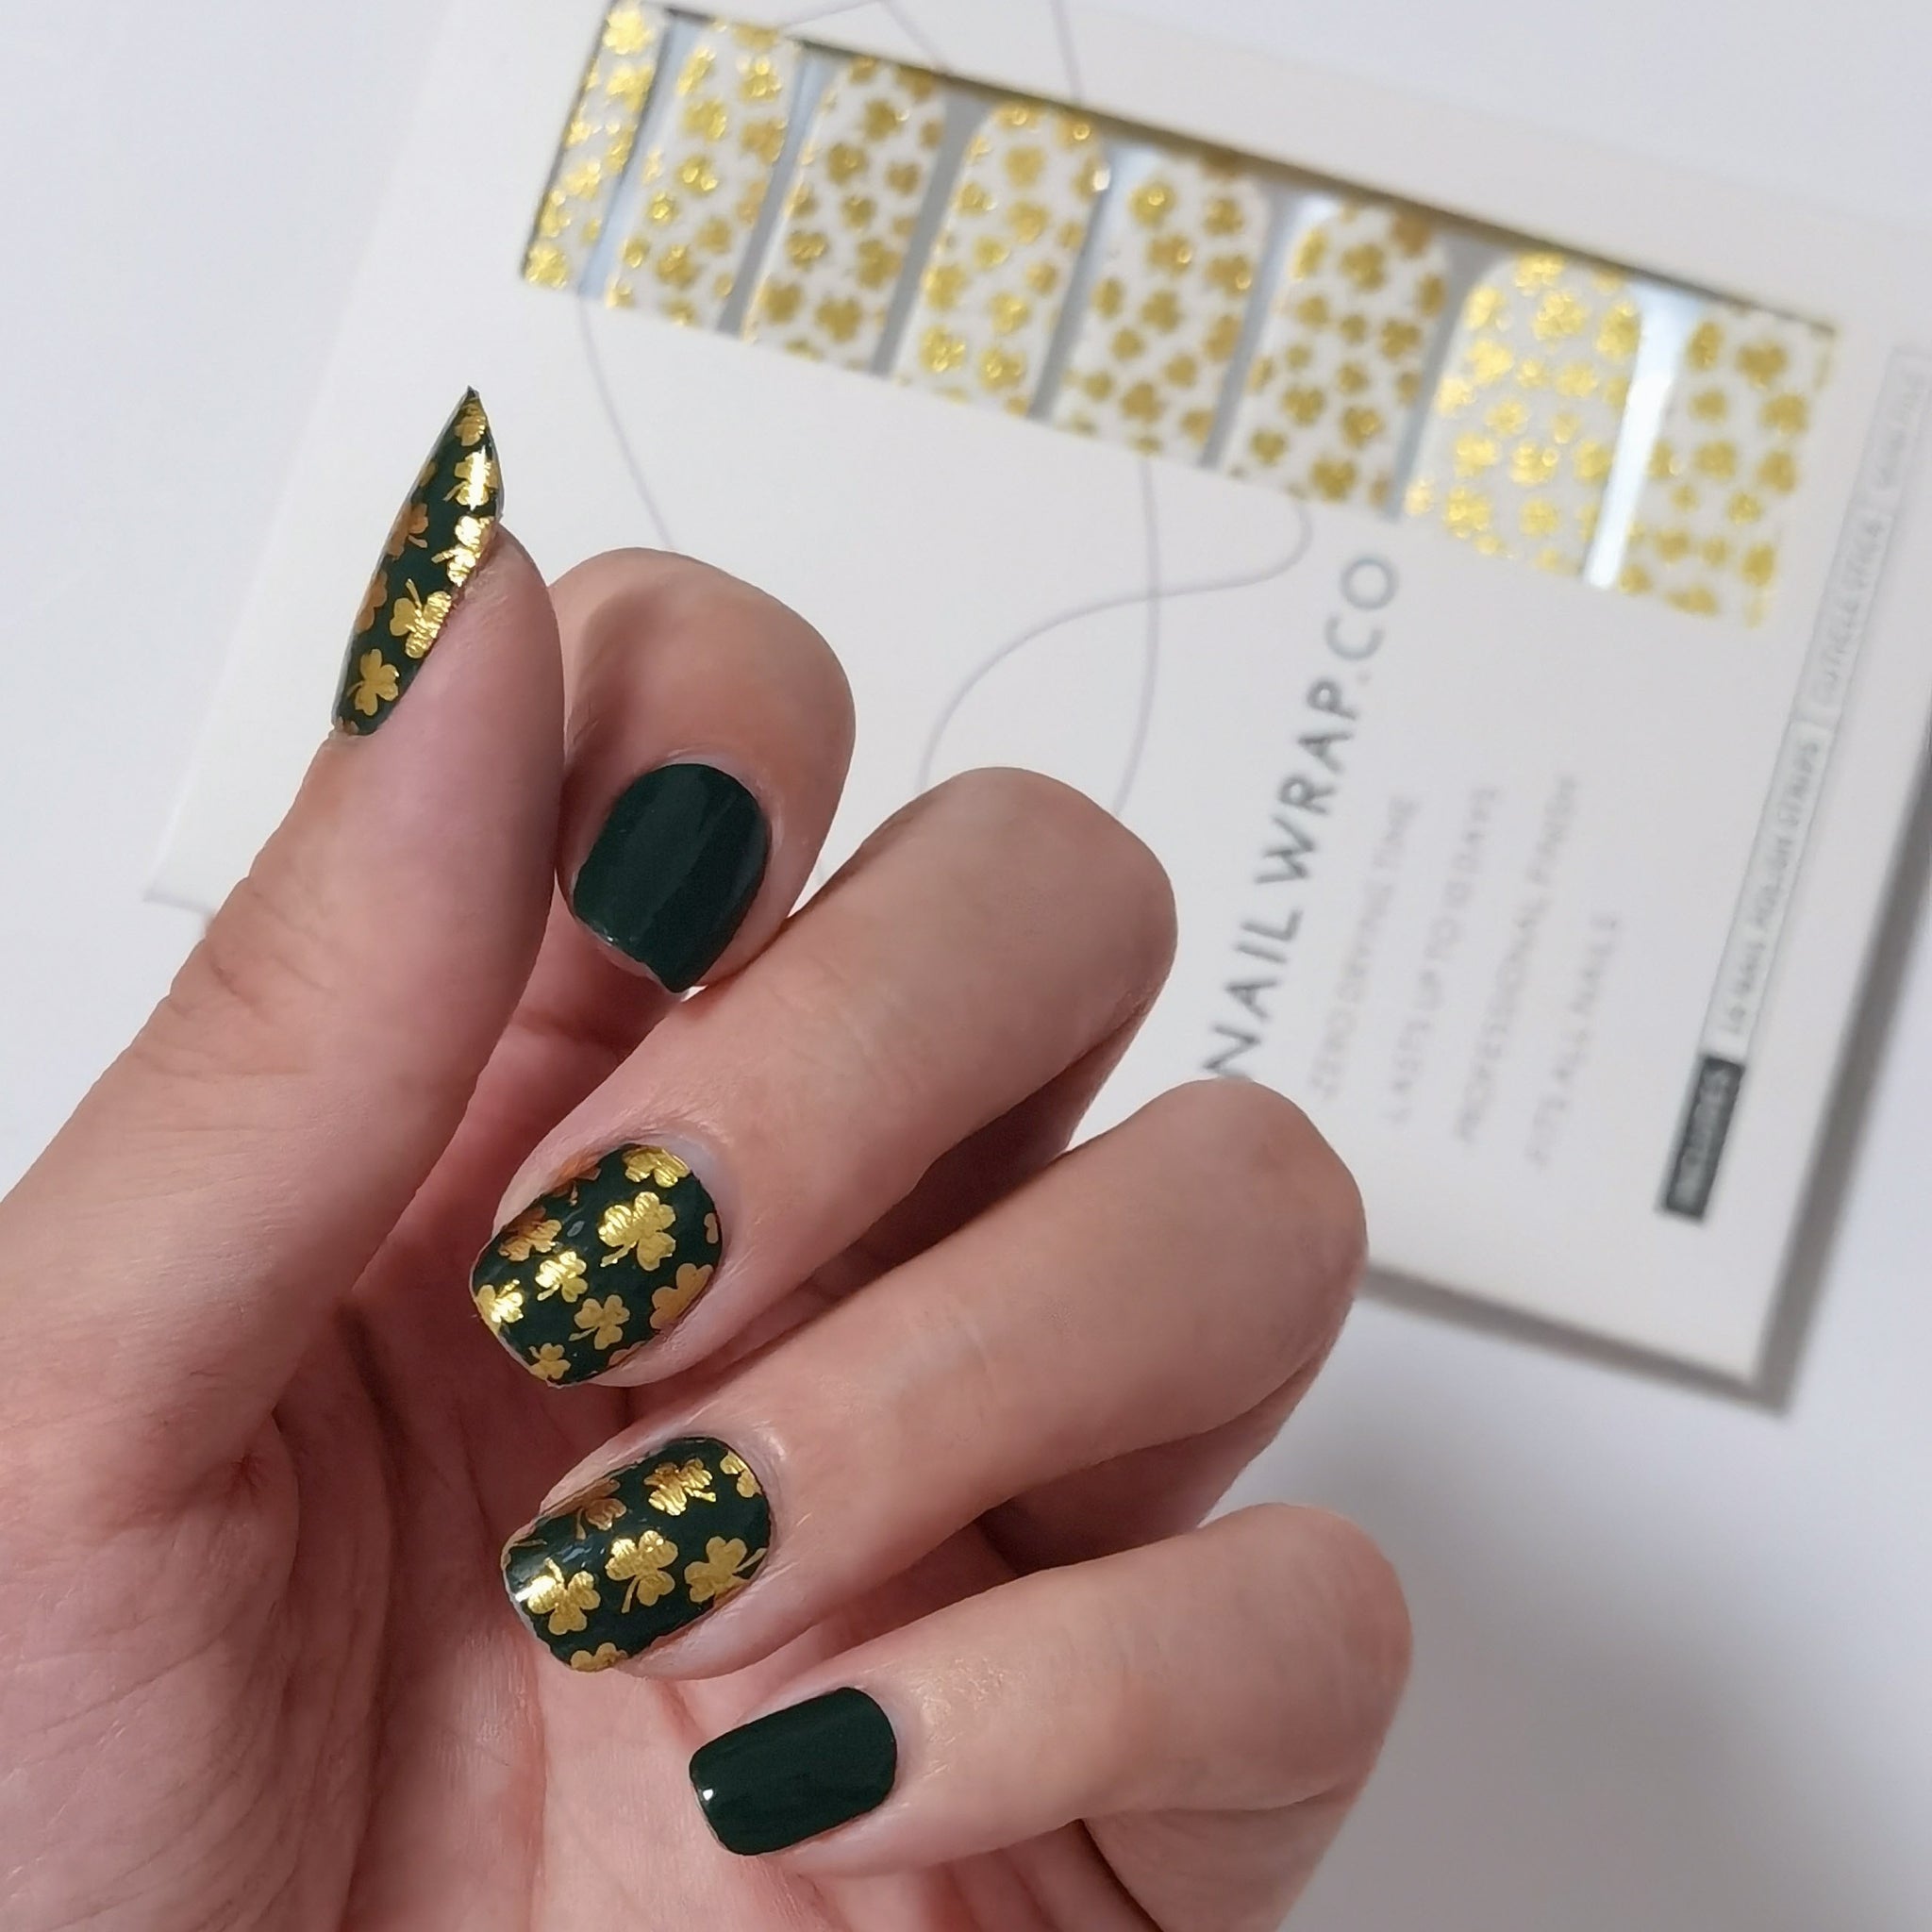 Hard Gel Nails | Custom Color Hard Gel Nails | Green with Gold Accent Nail  Design - YouTube